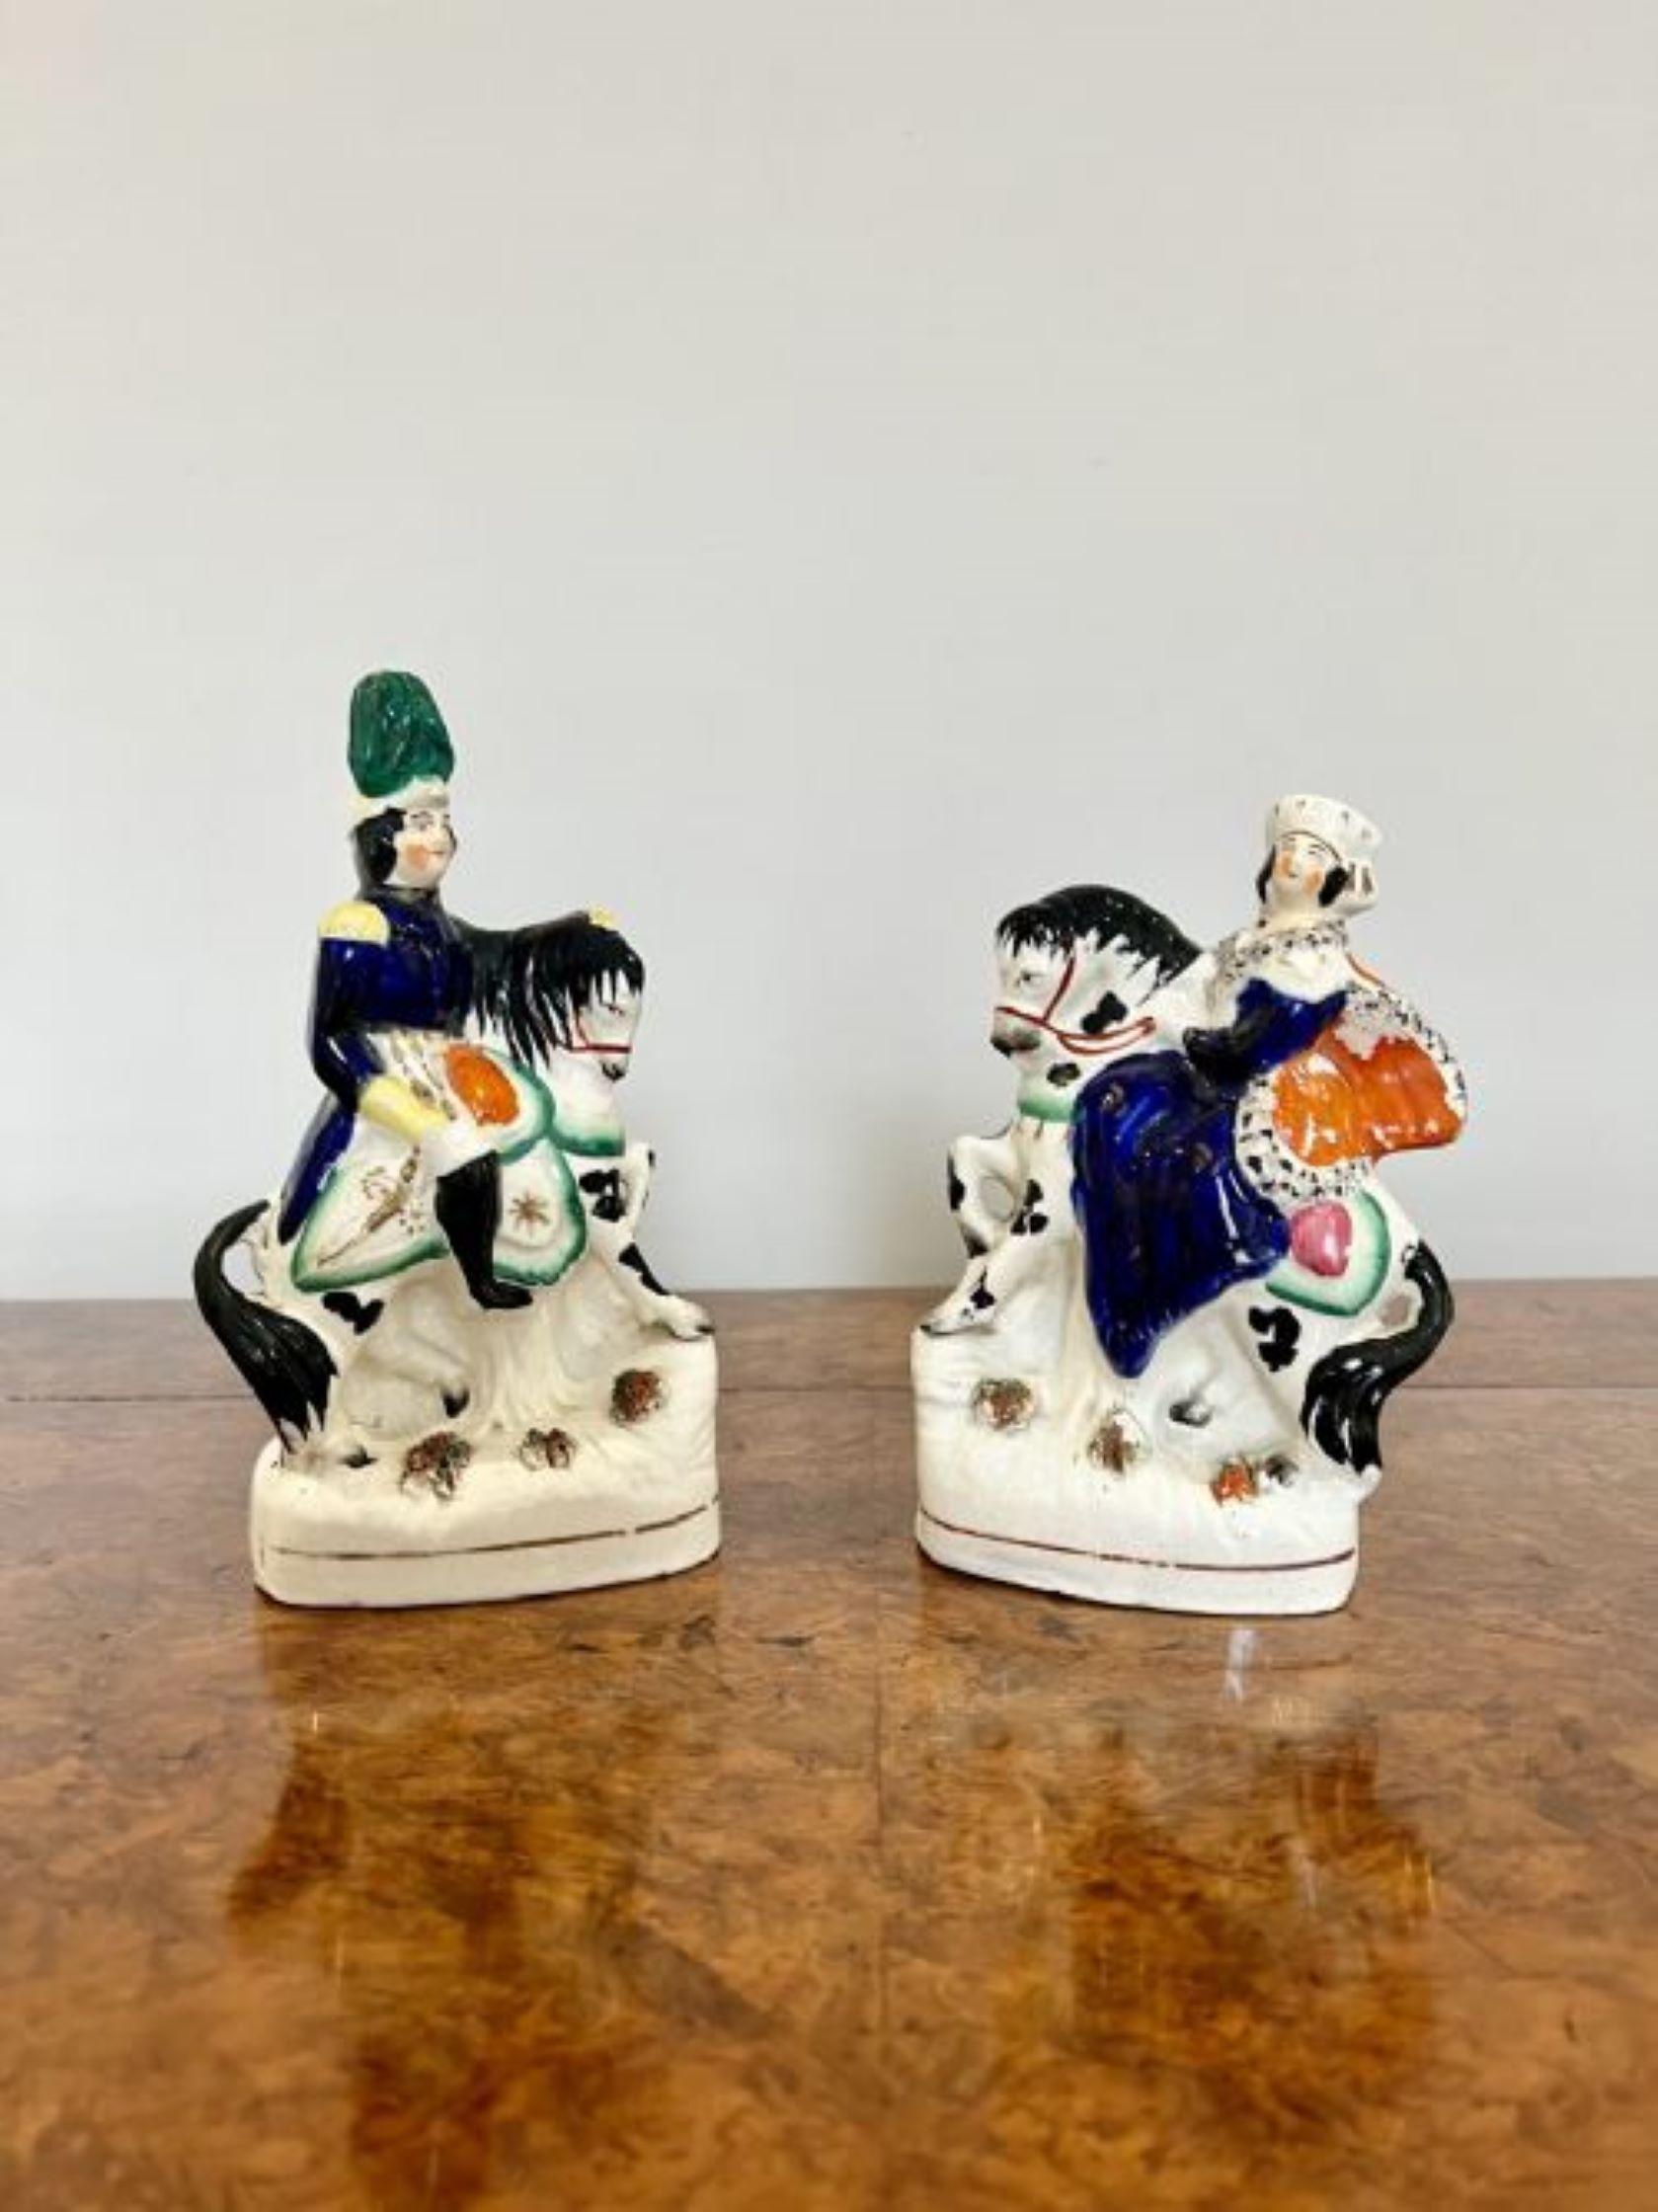 Quality pair of antique Victorian Staffordshire Royal figures having a quality pair of antique Victorian Staffordshire Royal figures of Prince Albert and Queen Victoria on horse back in wonderful blue, green, yellow, white, black and orange colours